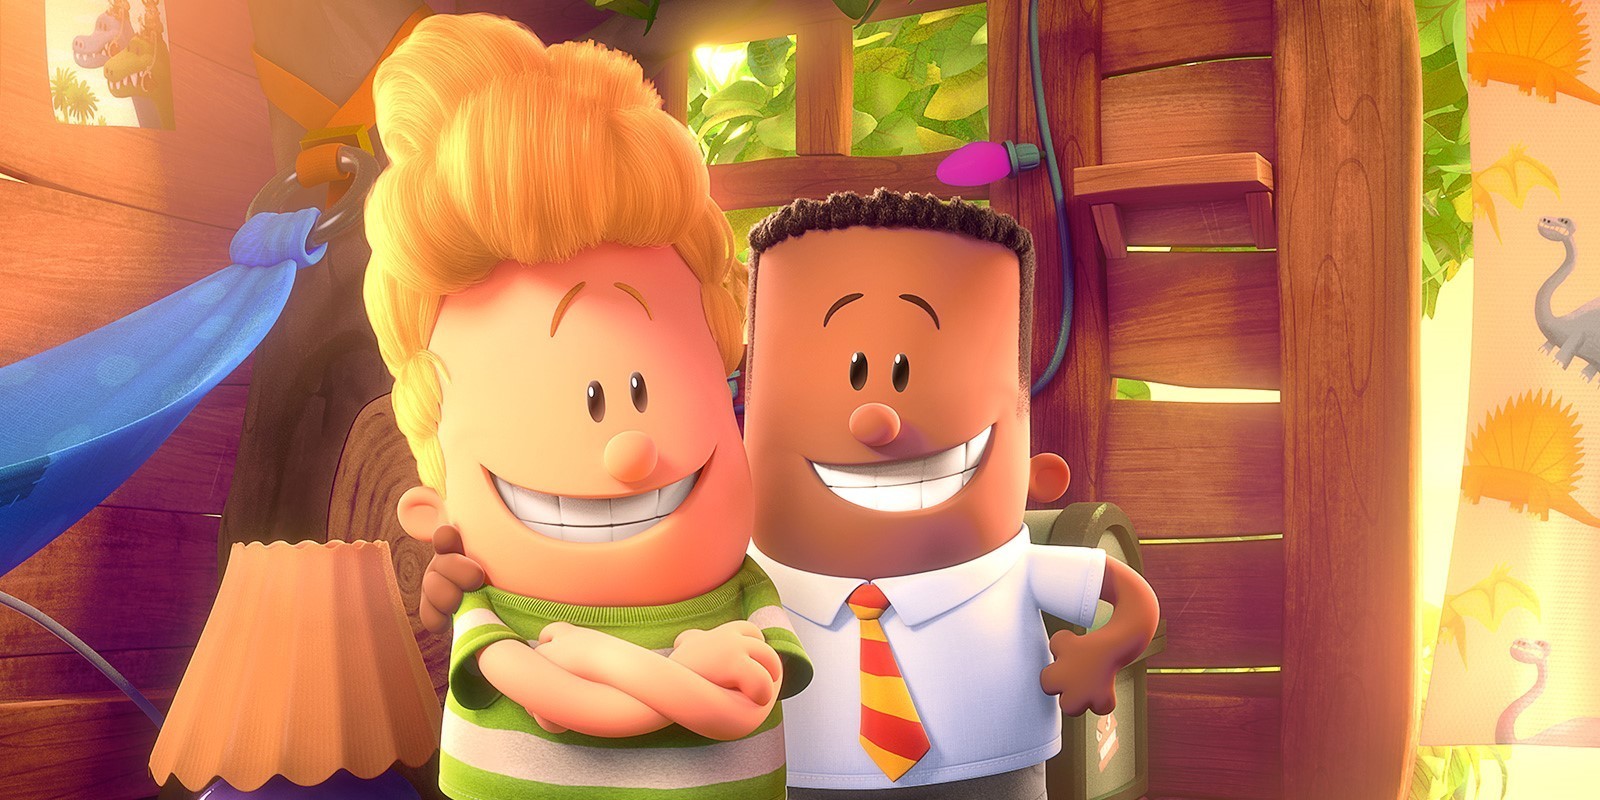 Harold Hutchins and George Beard from 20th Century Fox's Captain Underpants: The First Epic Movie (2017)